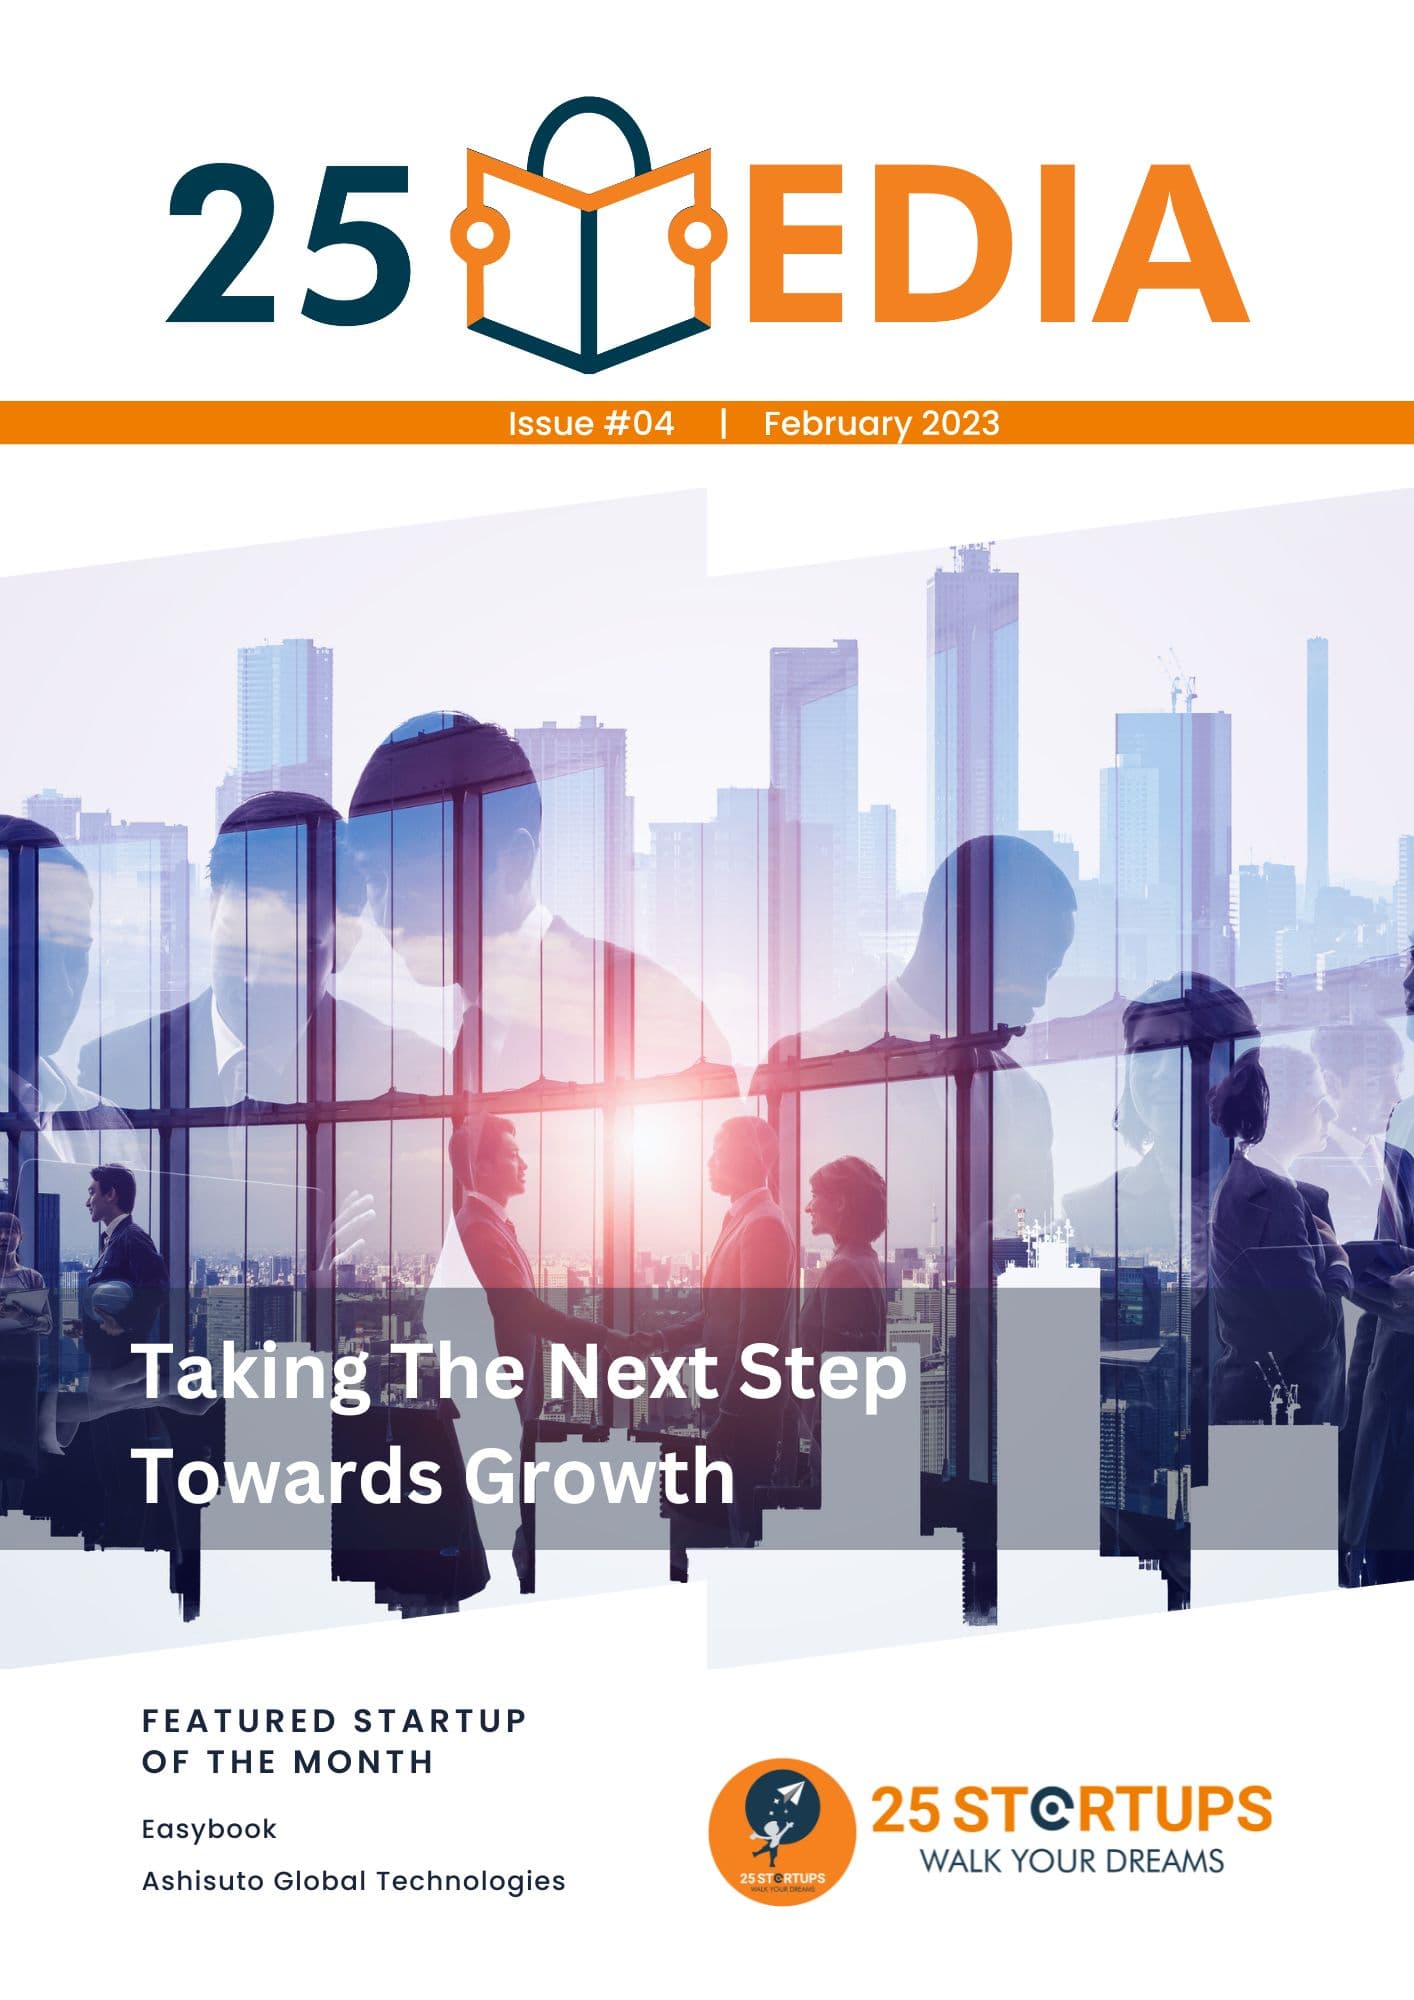 25 Media Issue #04: Taking The Next Step Towards Growth